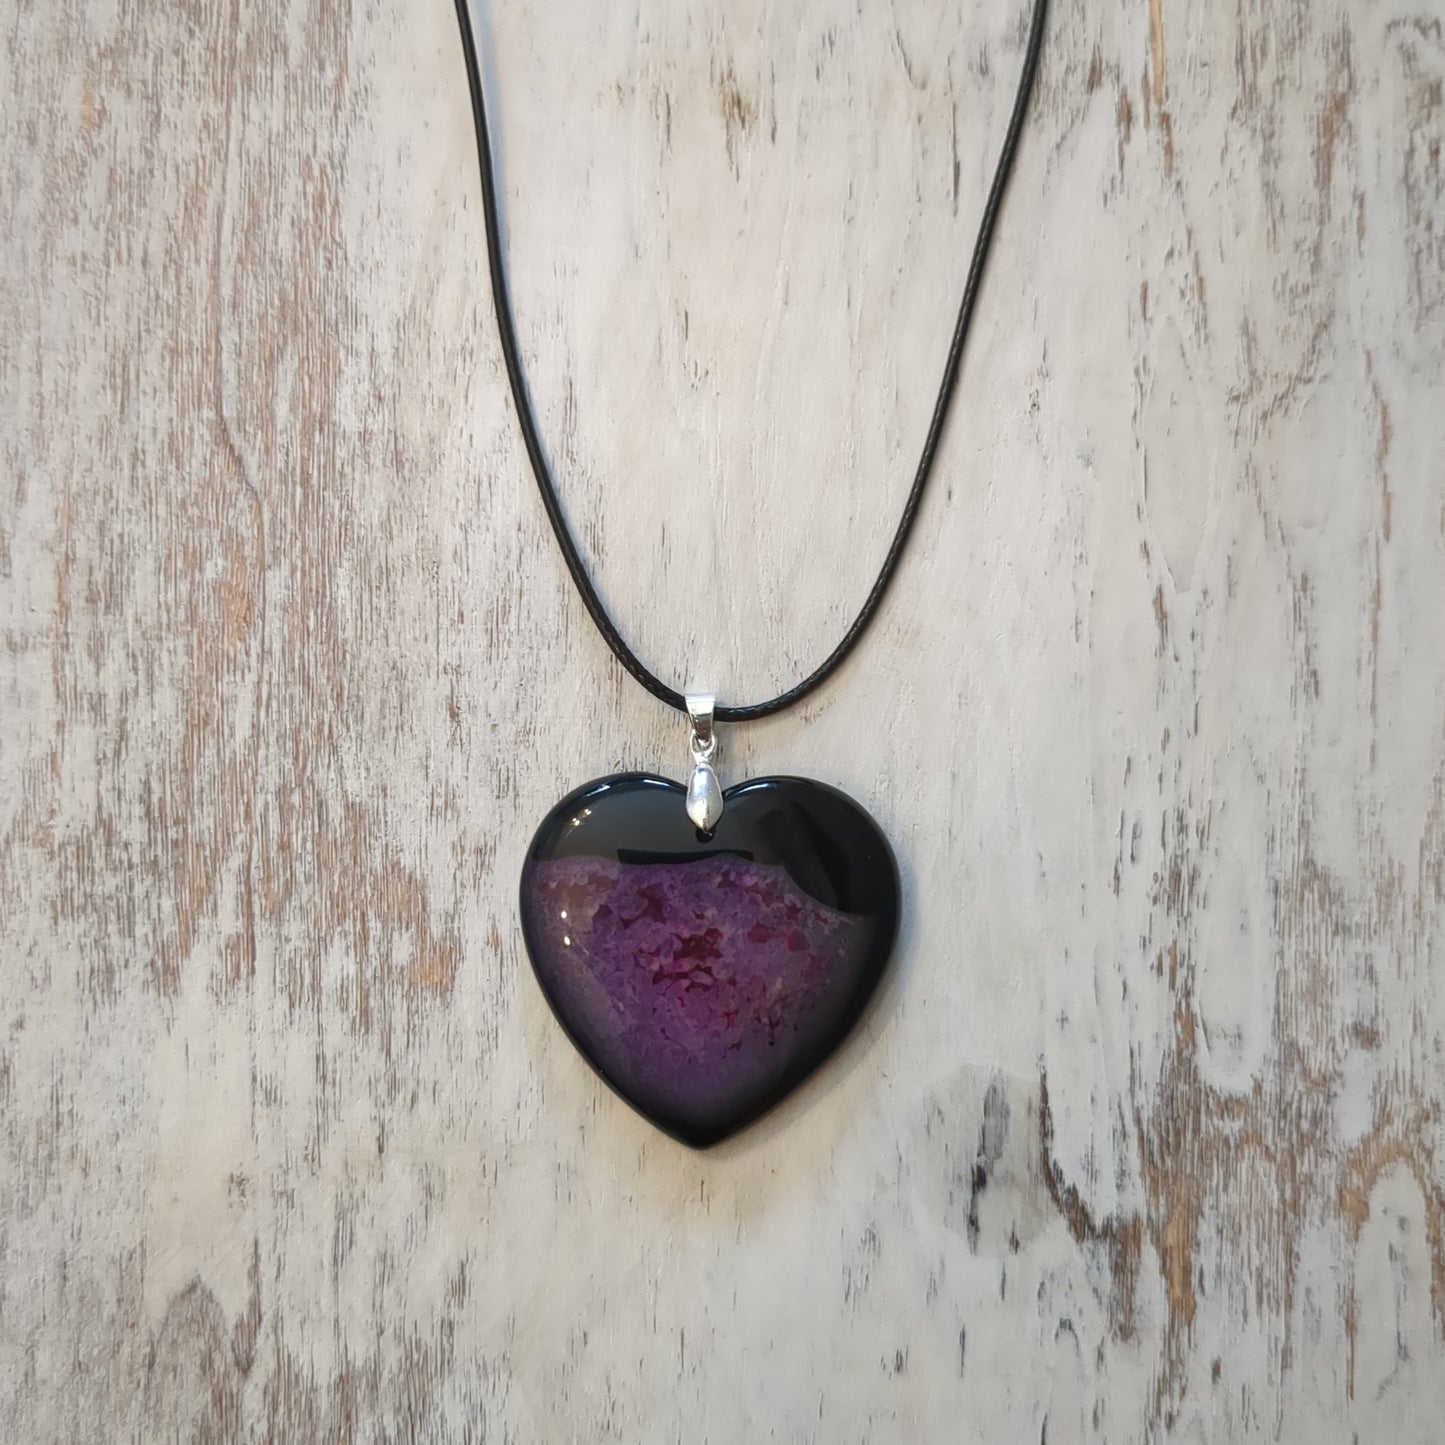 Black Onyx Heart Necklace Ken Rose Natural Stone Jewelry